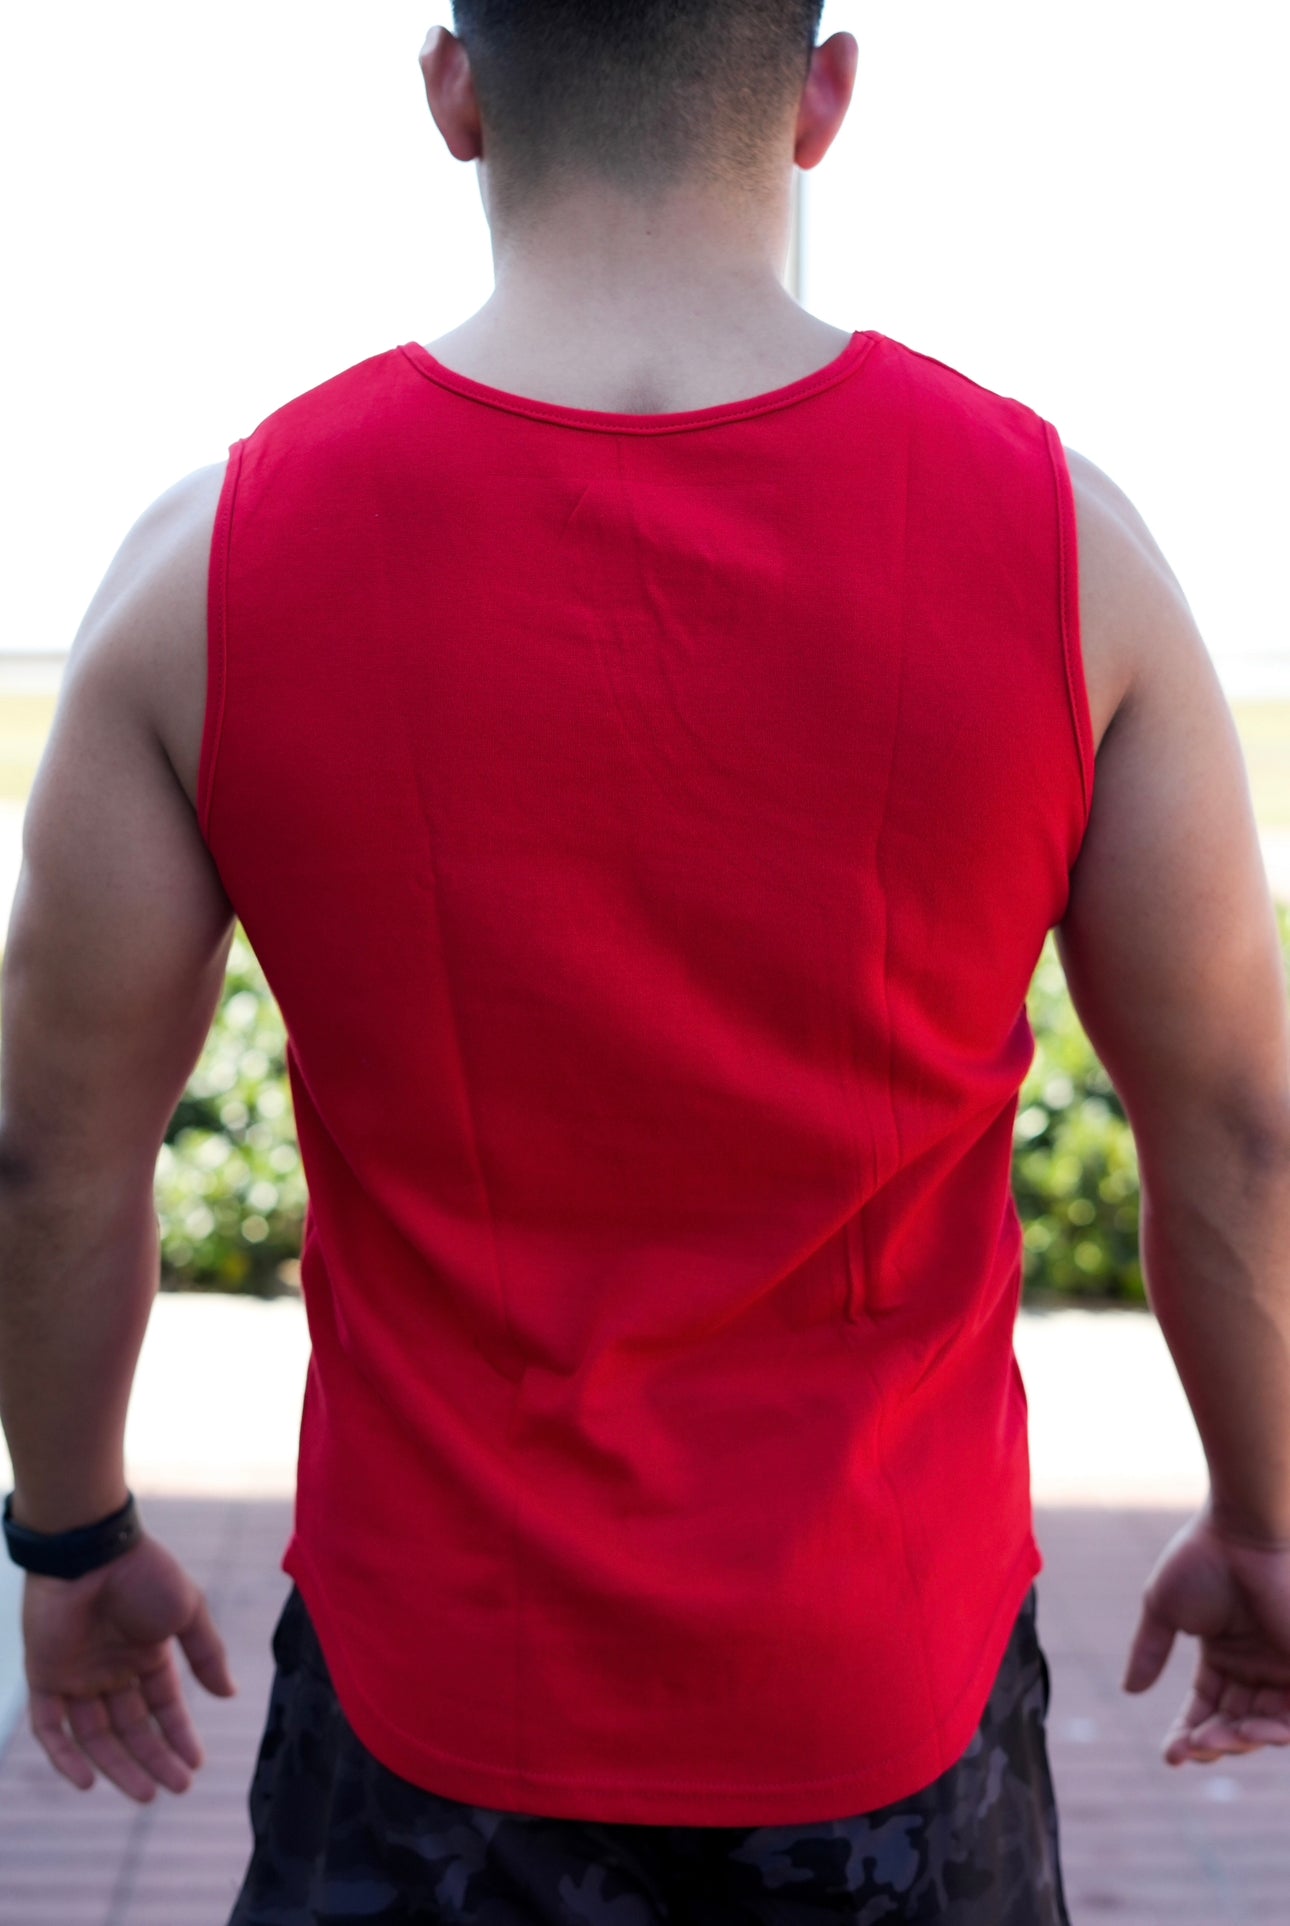 FXNL Muscle Tank - Red